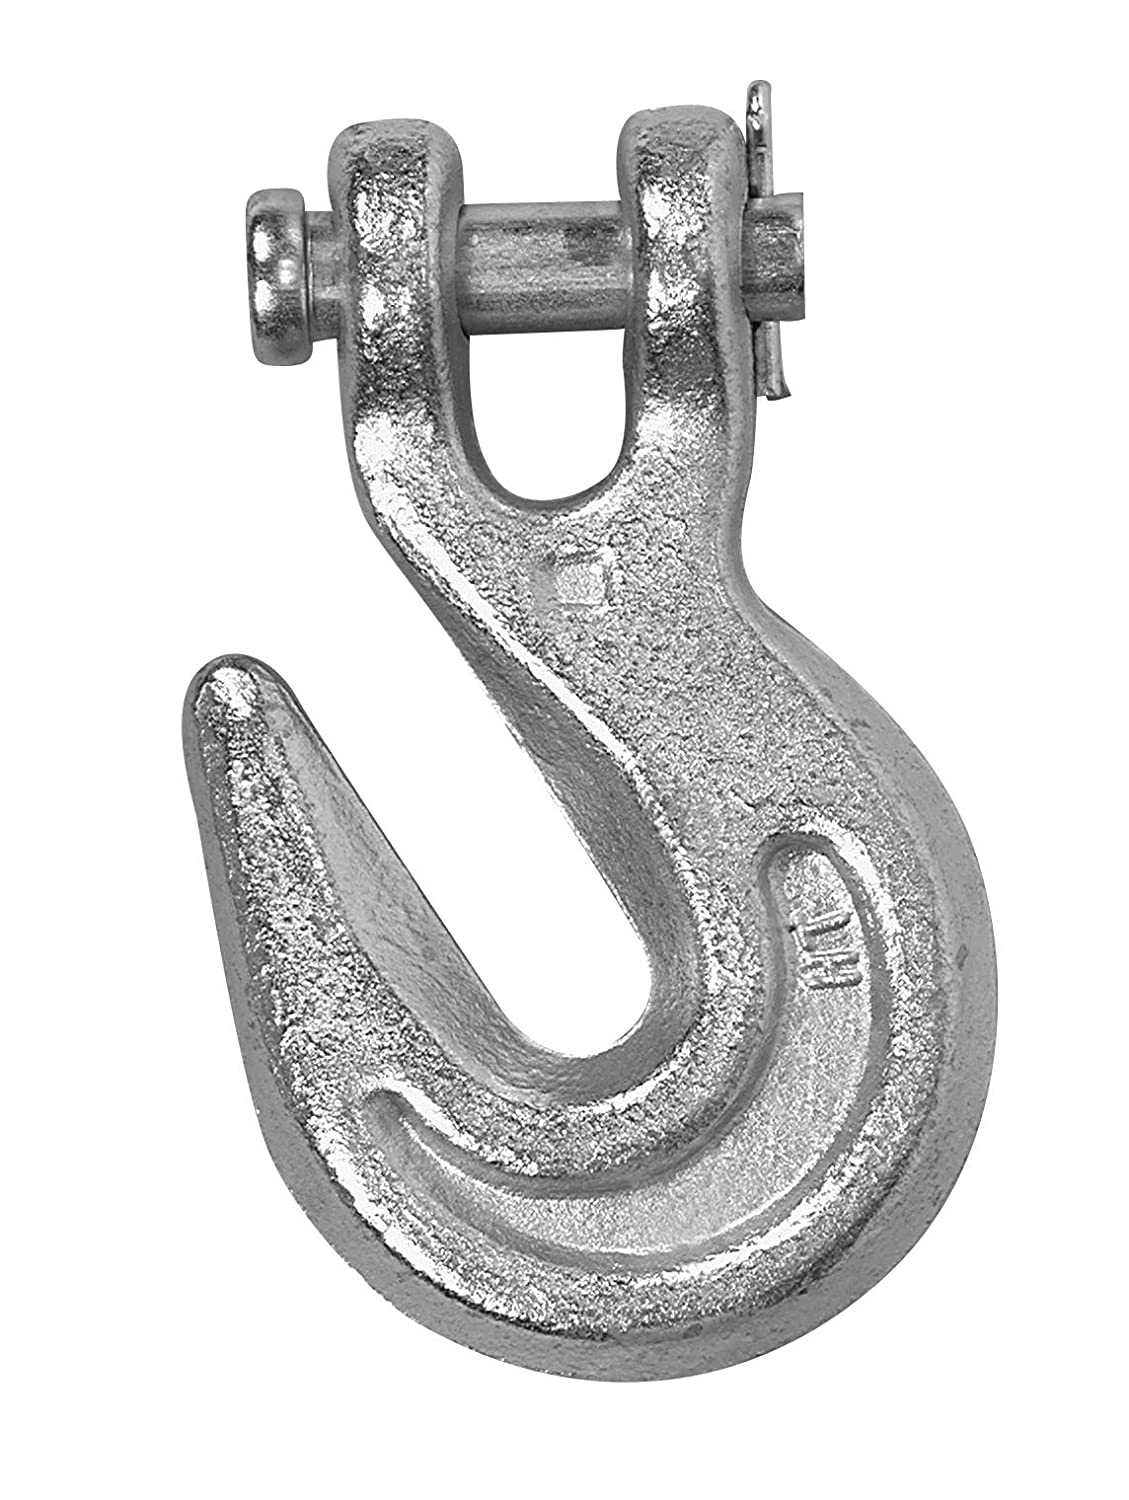 Campbell 4500404 System 4 Grade 43 Drop-Forged Carbon Steel Clevis Grab Hook, Self-Colored, 1/4 "Trade, 2600 lbs Working Load Limit, Box of 10